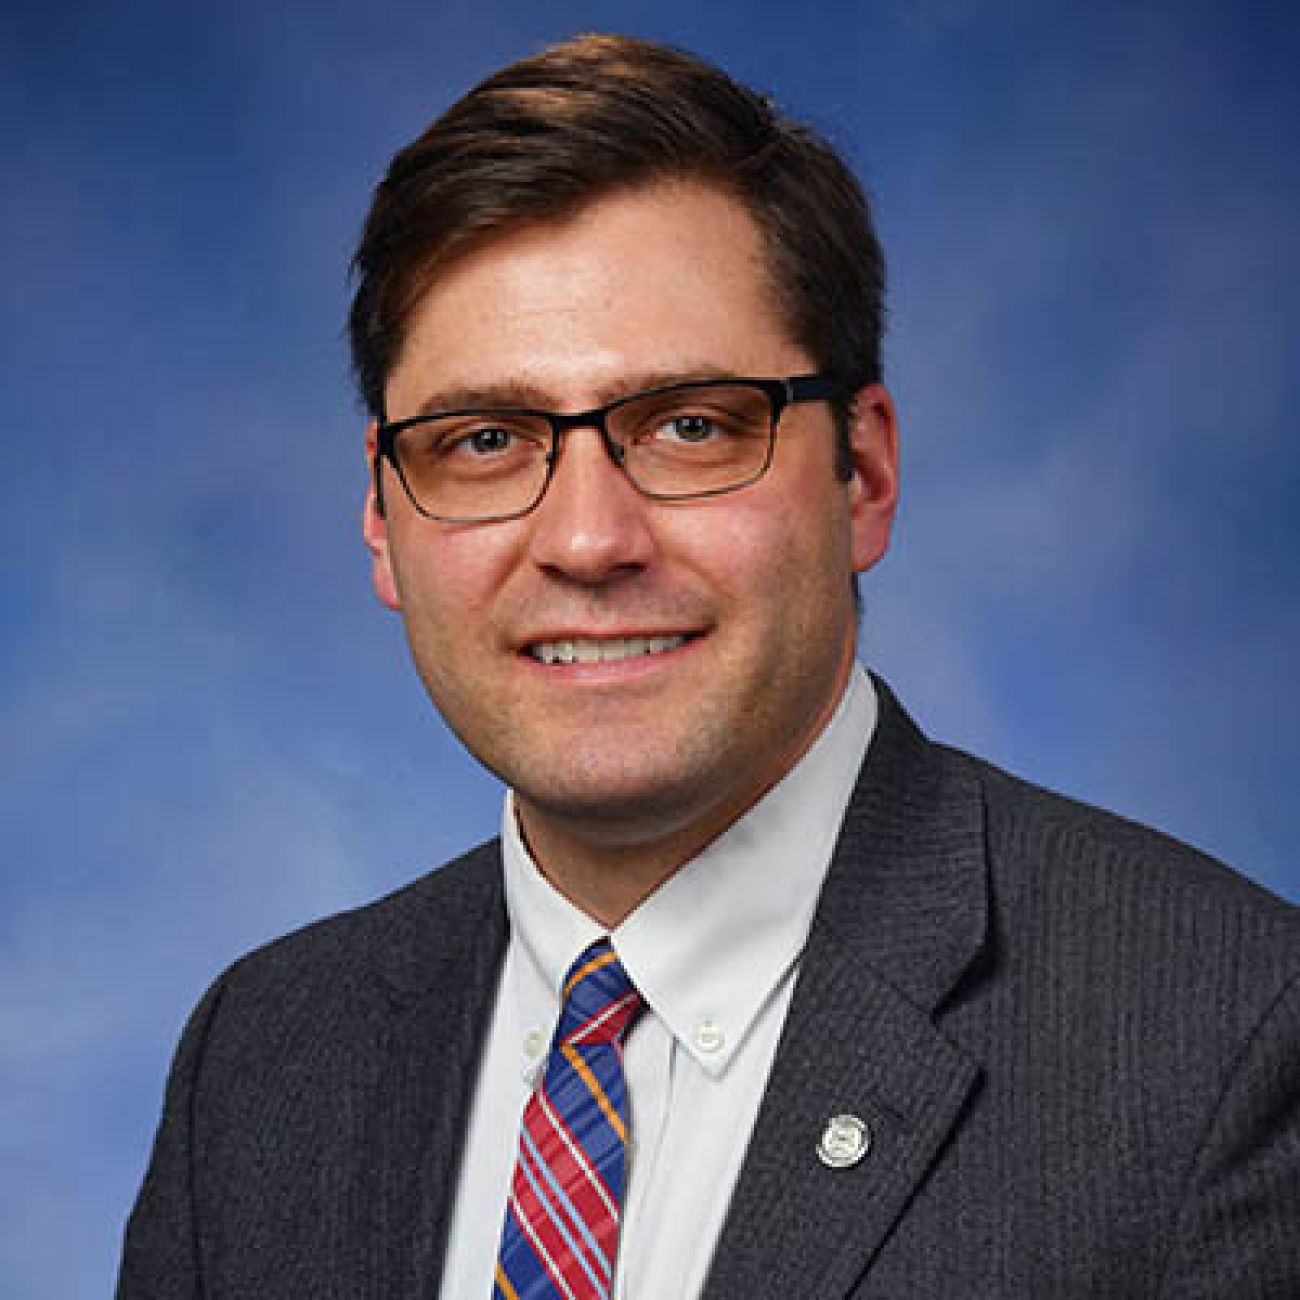 State Rep. Andrew Fink, R-Adams Township headshot